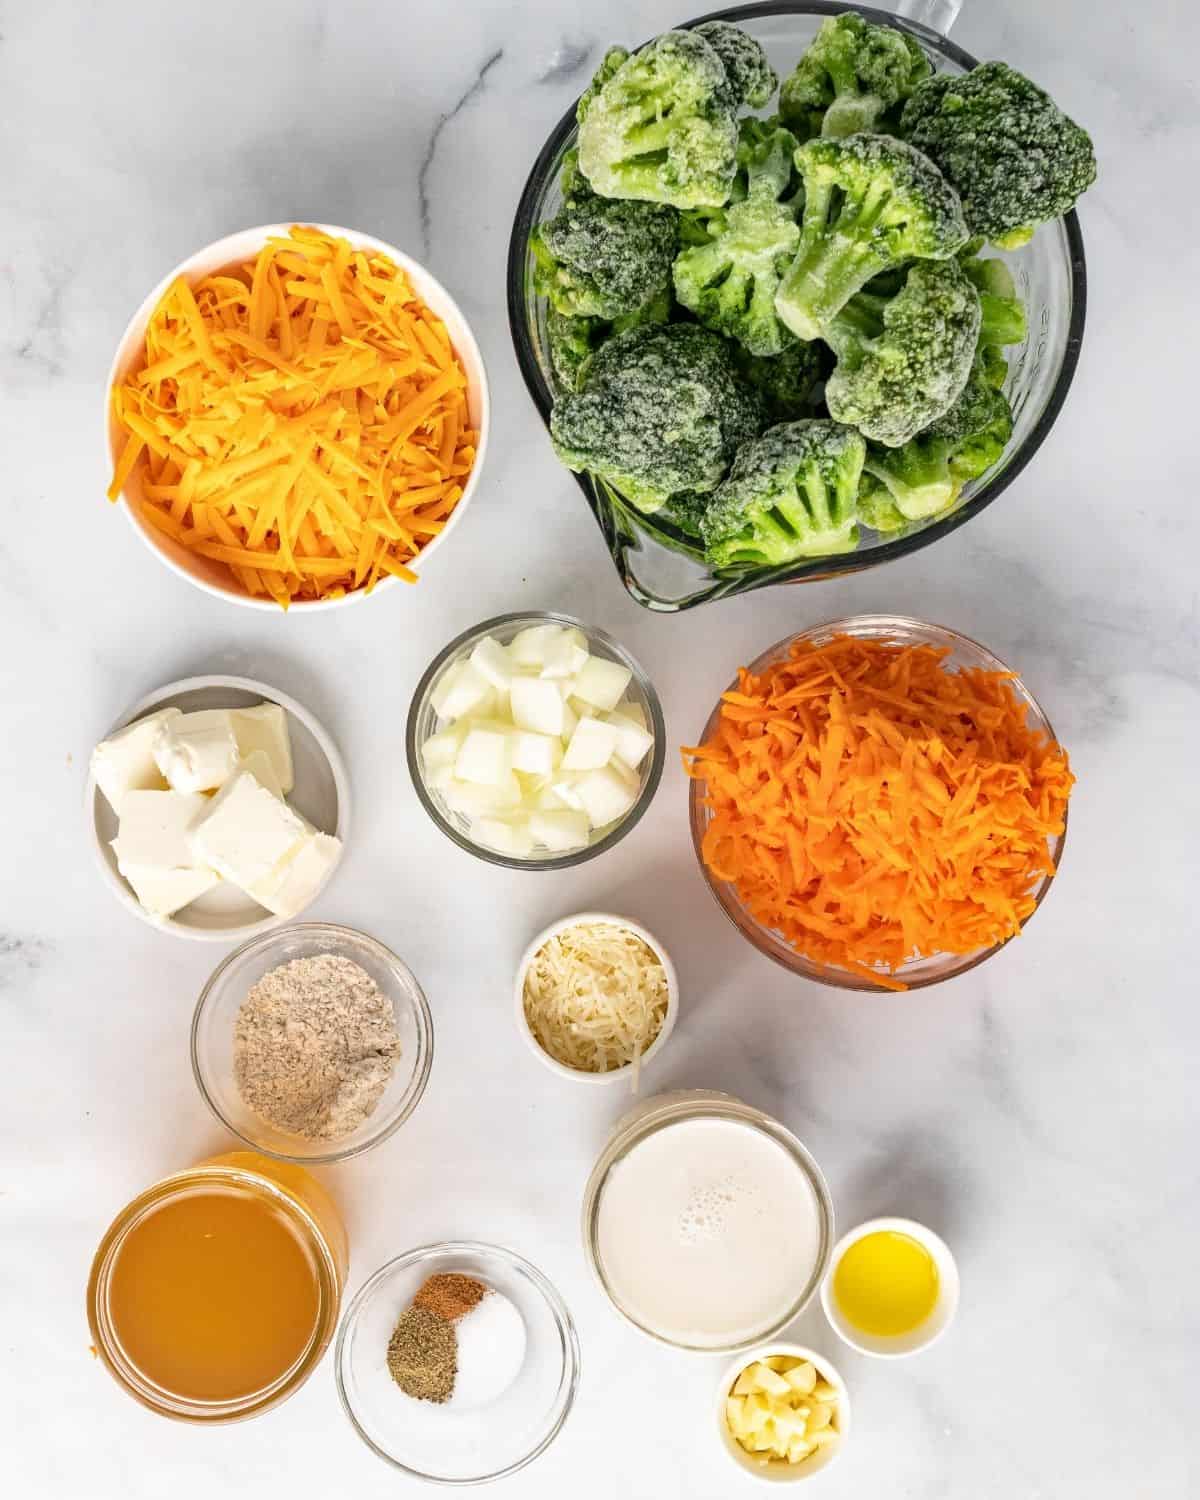 The ingredients to make gluten free broccoli cheddar soup.